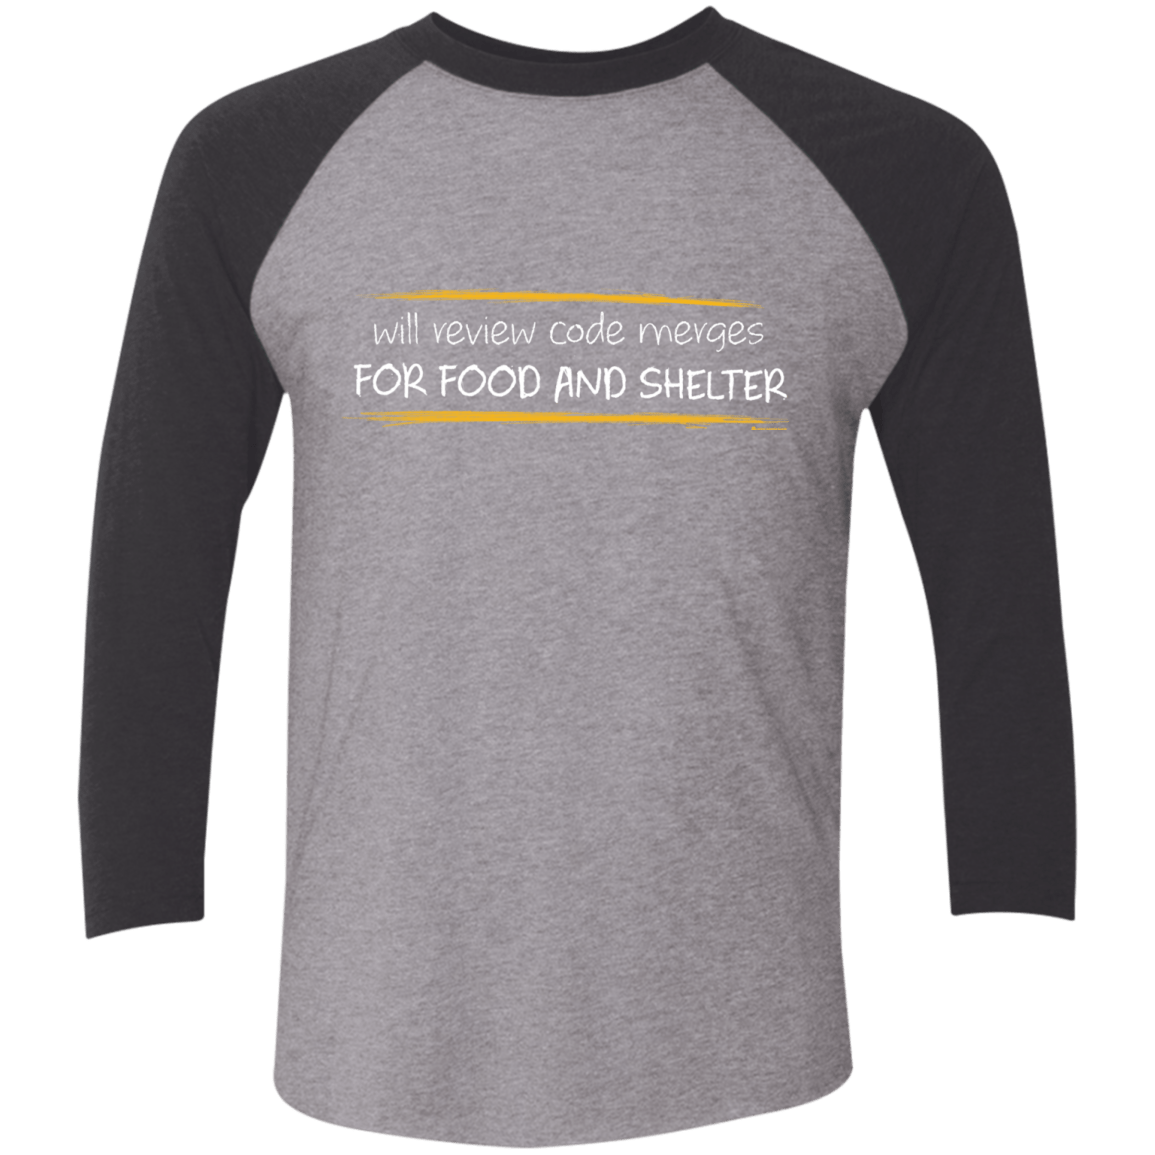 T-Shirts Premium Heather/Vintage Black / X-Small Reviewing Code For Food And Shelter Men's Triblend 3/4 Sleeve